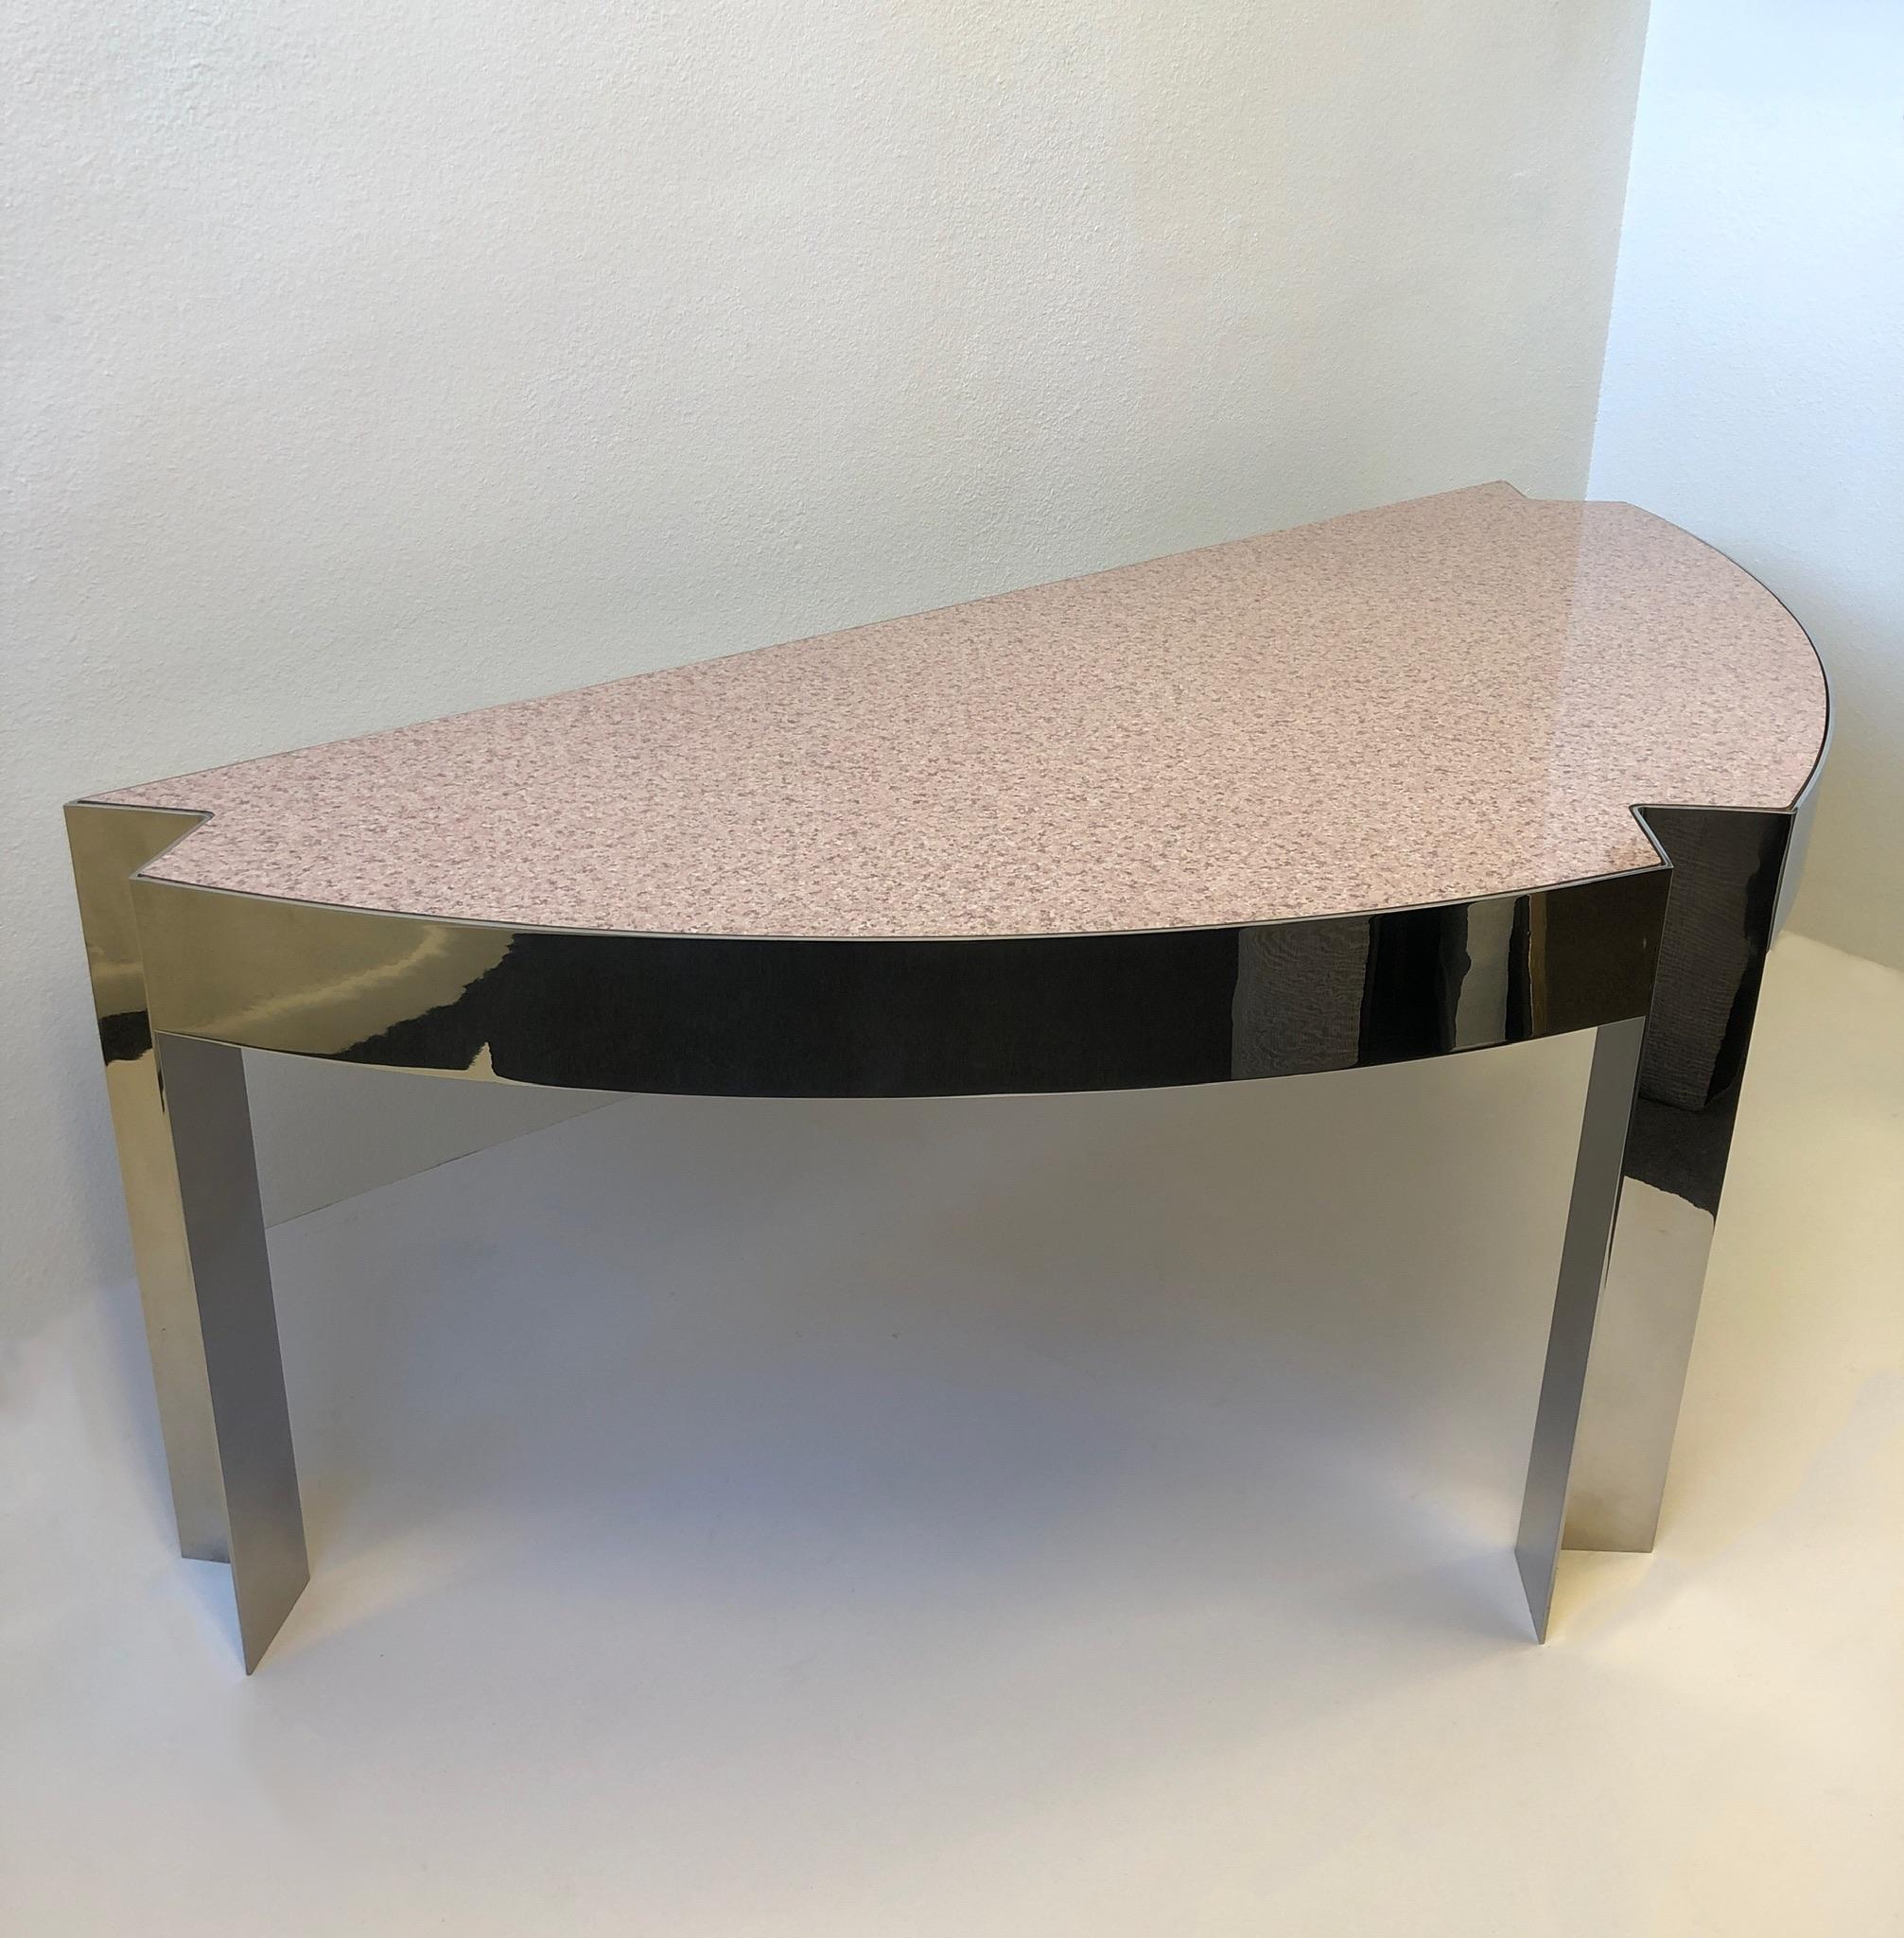 American Polish Aluminum and Pink Granite Formica Desk by Leon Rosen for Pace Collection